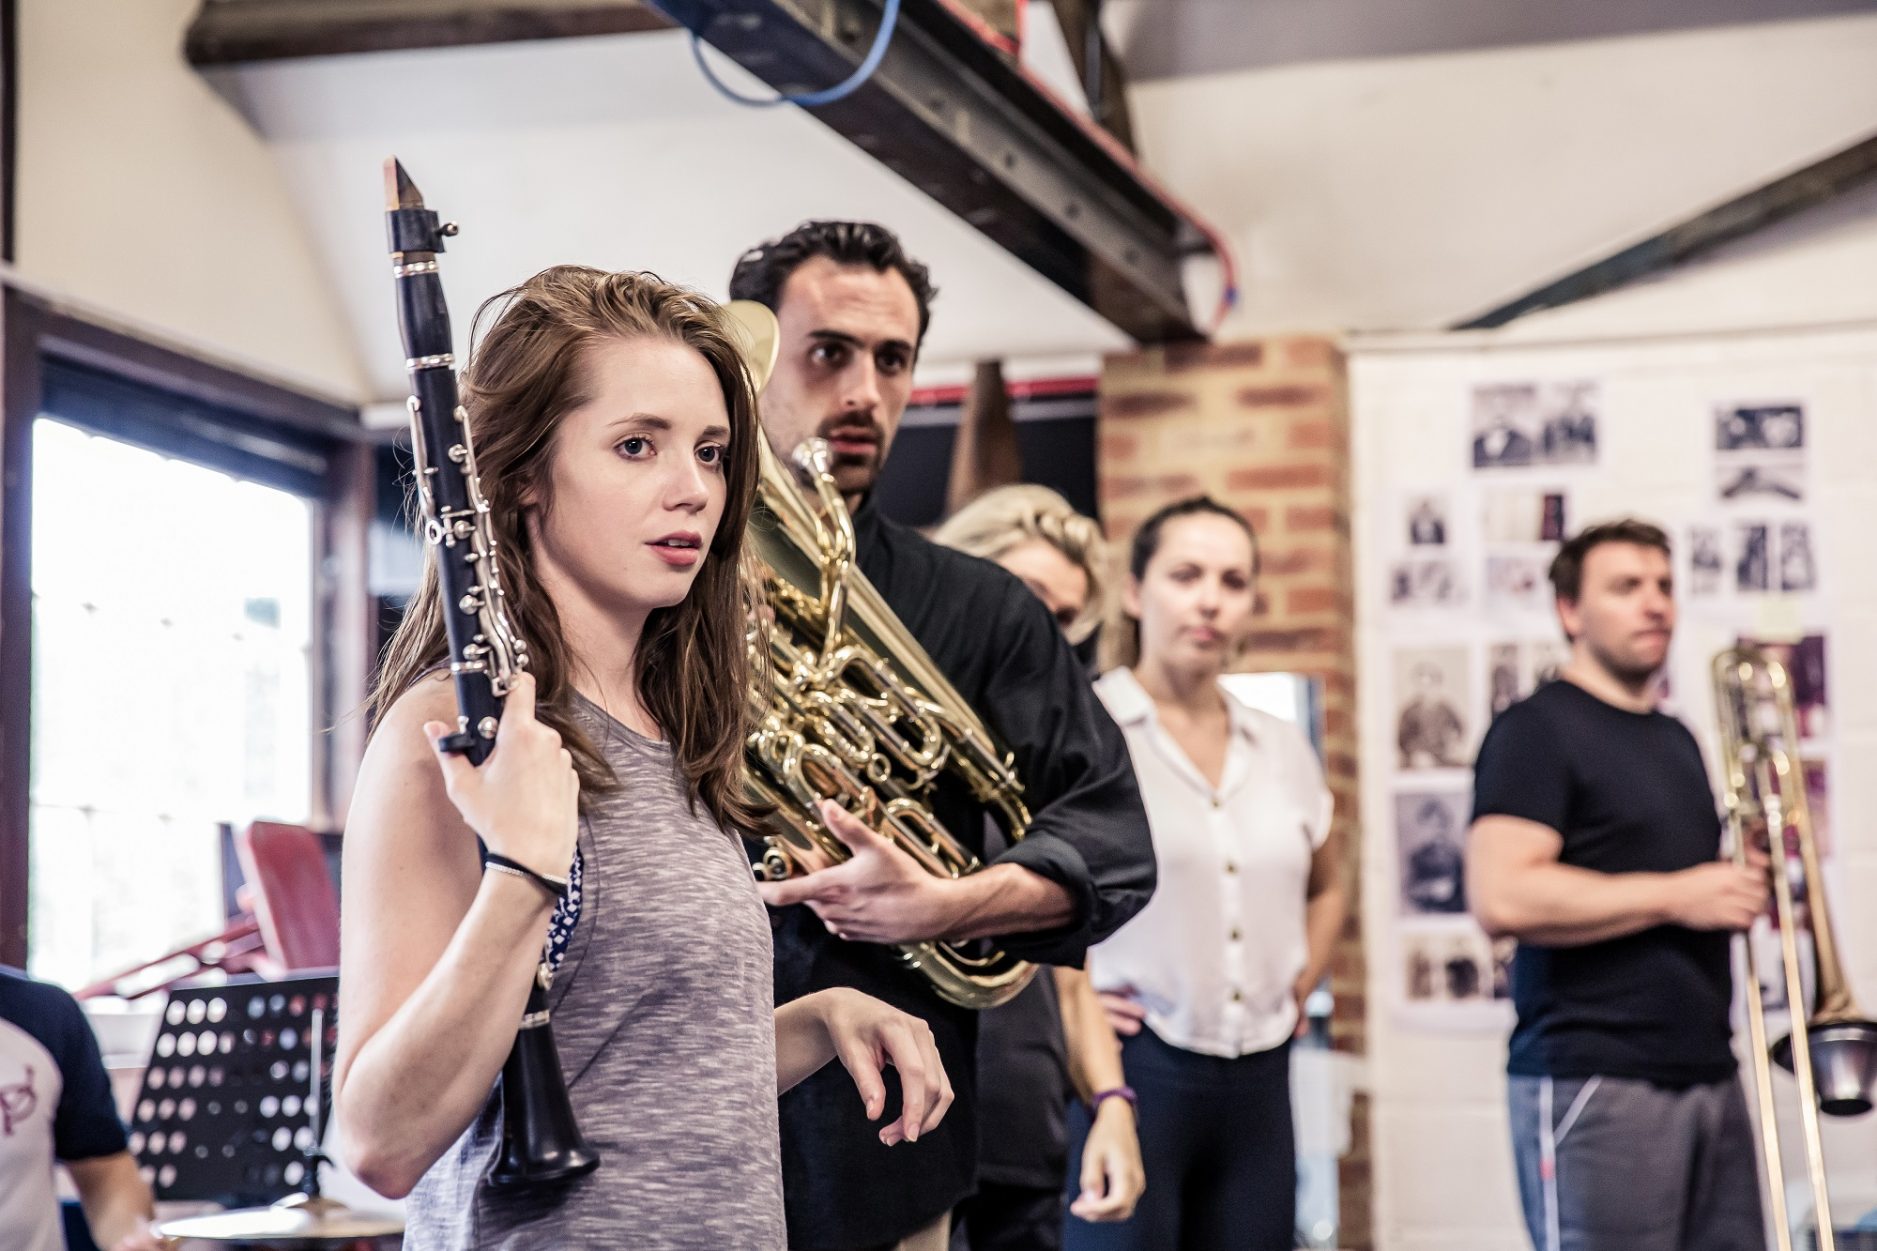 Assassins in Rehearsal, photography by The Other Richard